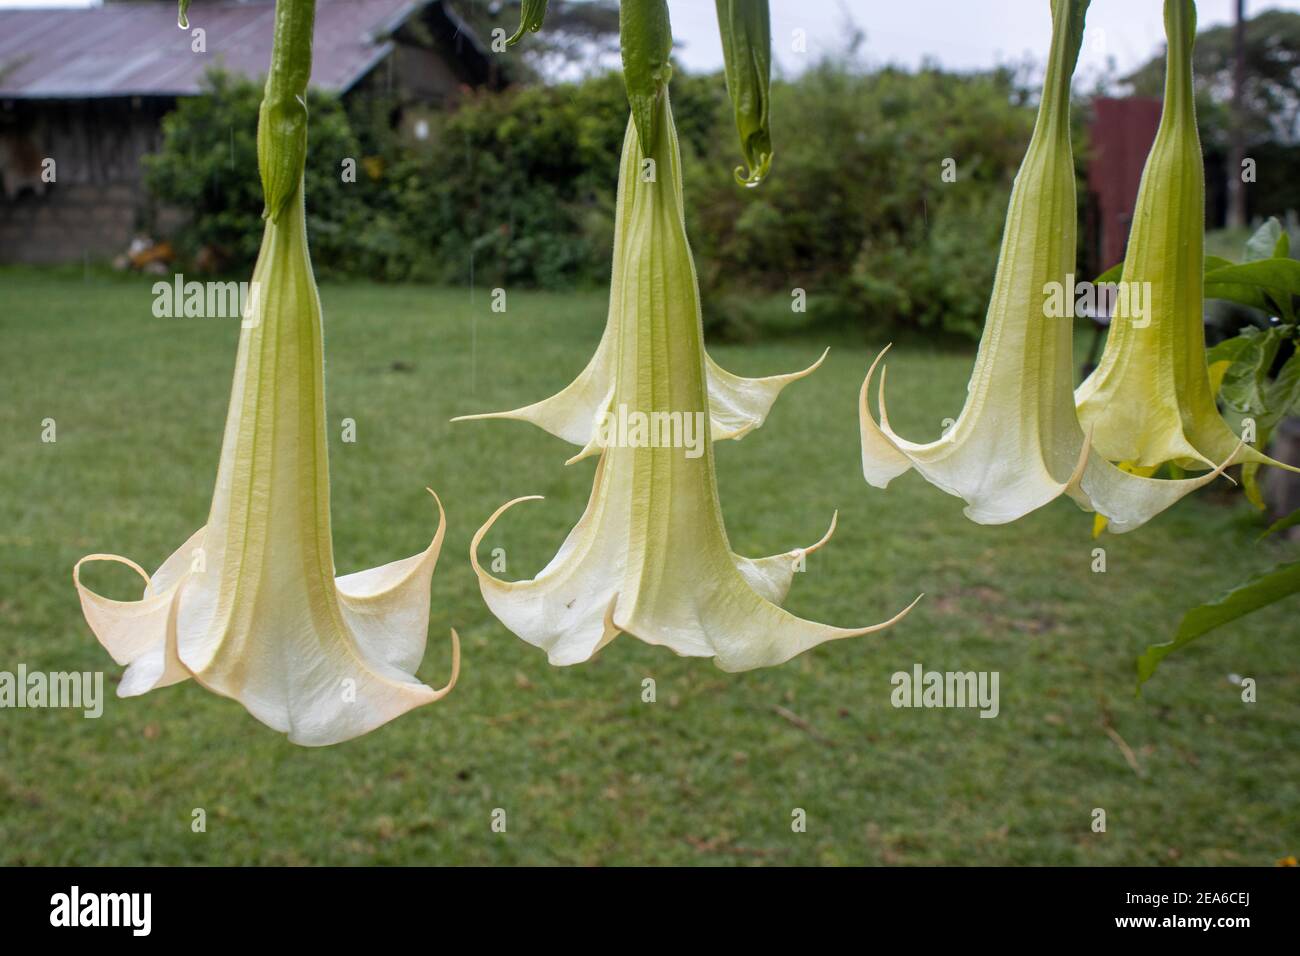 White angels trumpets or trumpet flowers hanging in the garden 2 Stock Photo